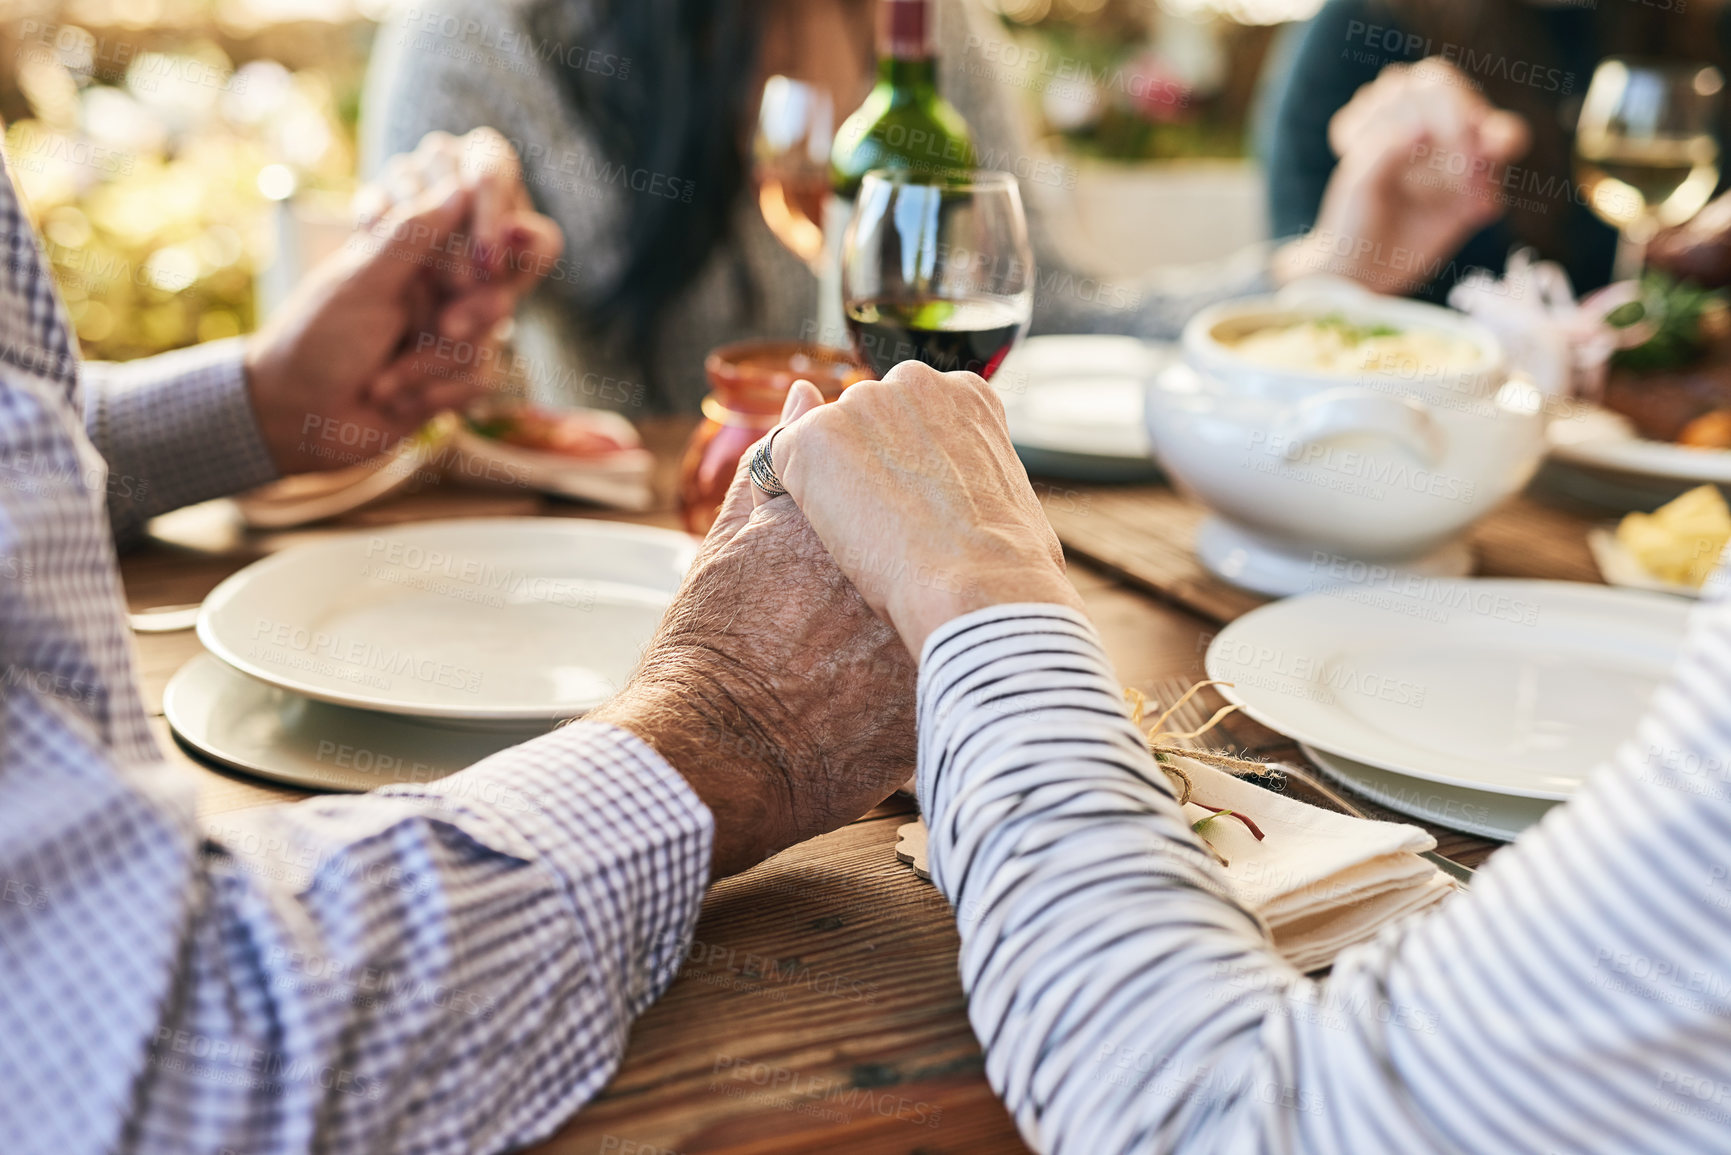 Buy stock photo Dinner, holding hands and family prayer at table for thanksgiving celebration with faith, religion and holiday gratitude. Love, social and hand holding of people praying for party, food and wine